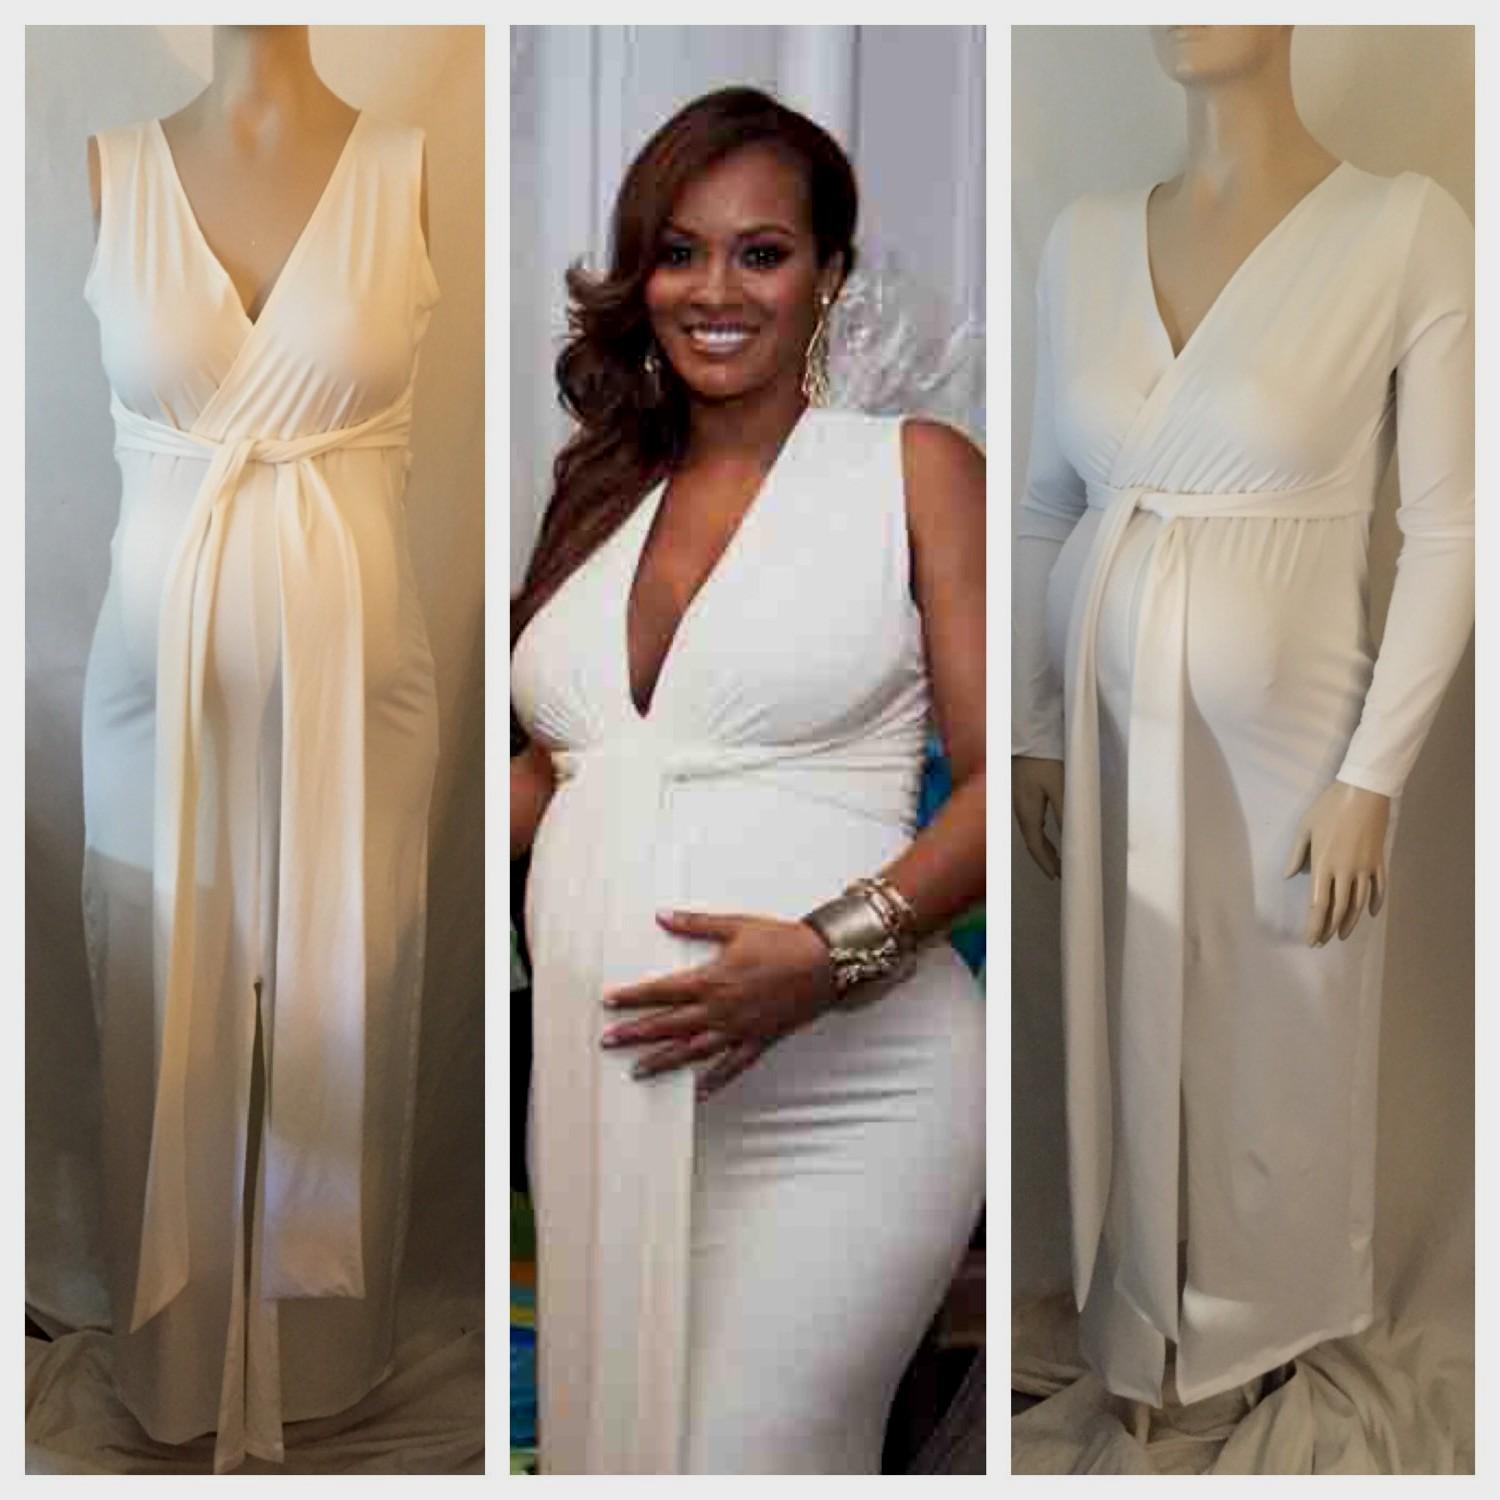 Full Size of Baby Shower:what To Wear To A Baby Shower In October Mom And Dad Baby Shower Outfits Petite Maternity Dresses For Baby Shower Maternity Blouses For Baby Shower Affordable Maternity Dresses For Baby Shower Long Maternity Dresses For Baby Shower Cheap Plus Size Maternity Clothes Baby Shower Dresses For Fall